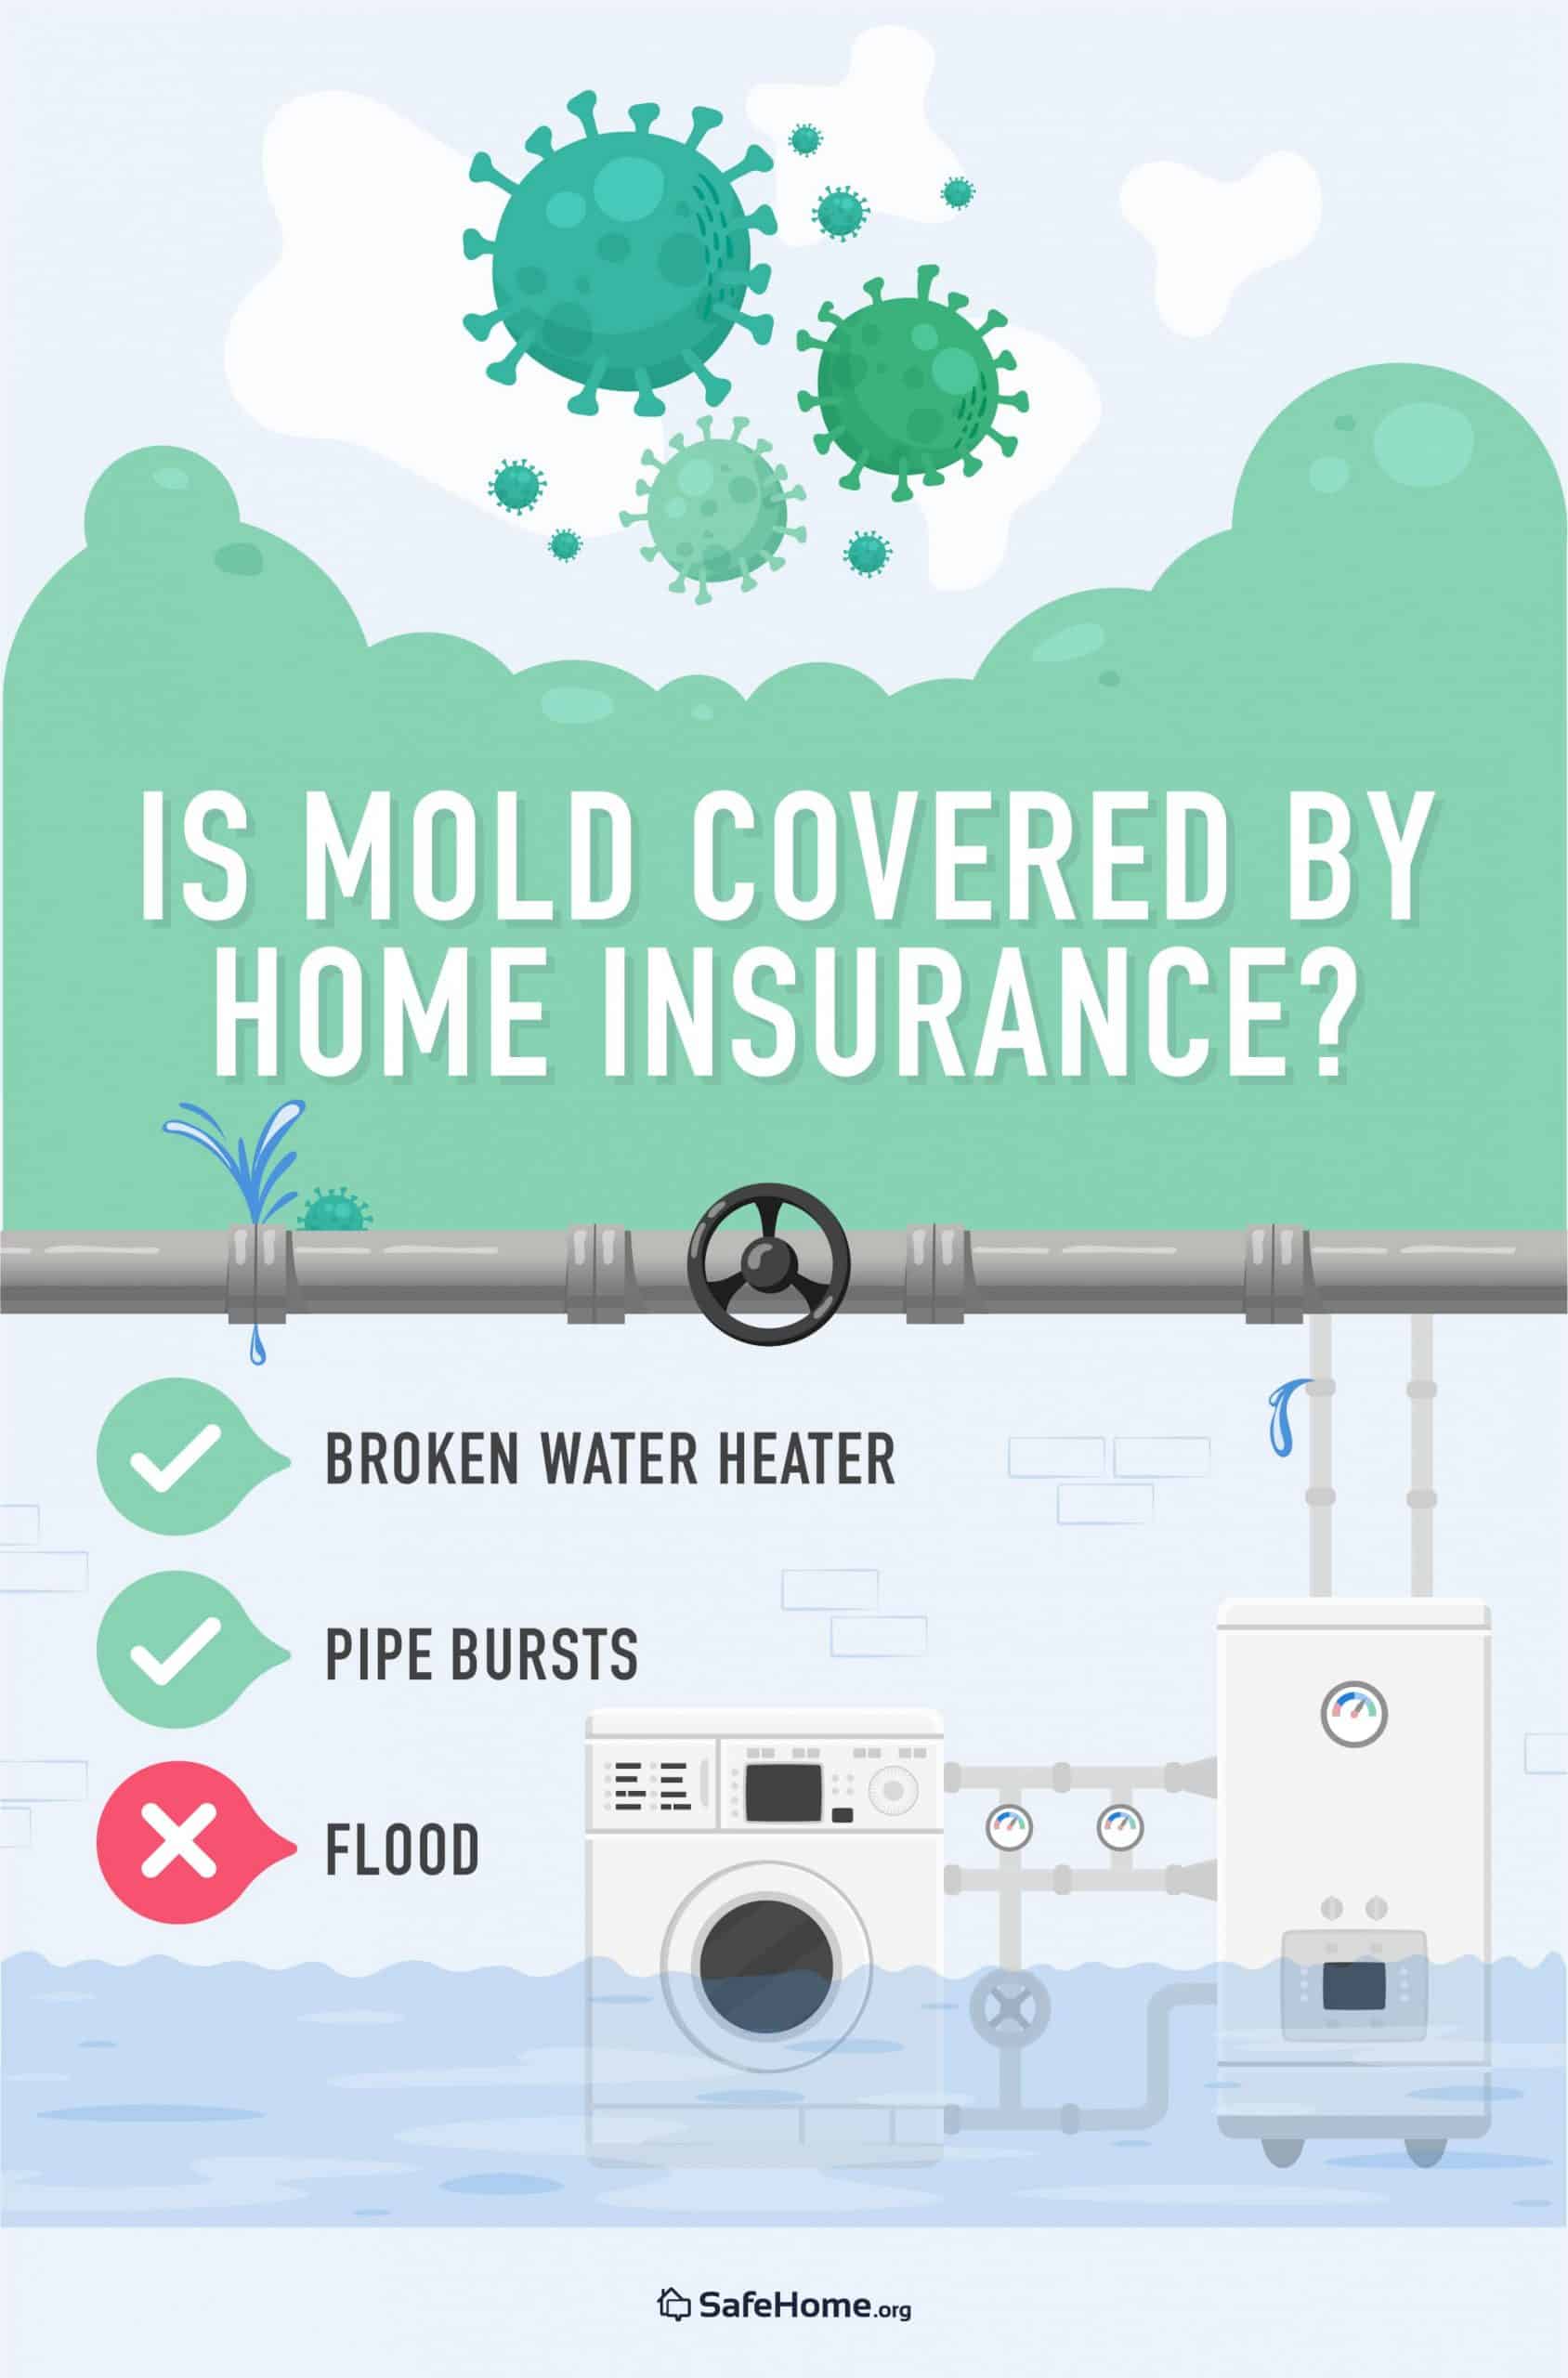 Is mold covered by home insurance?